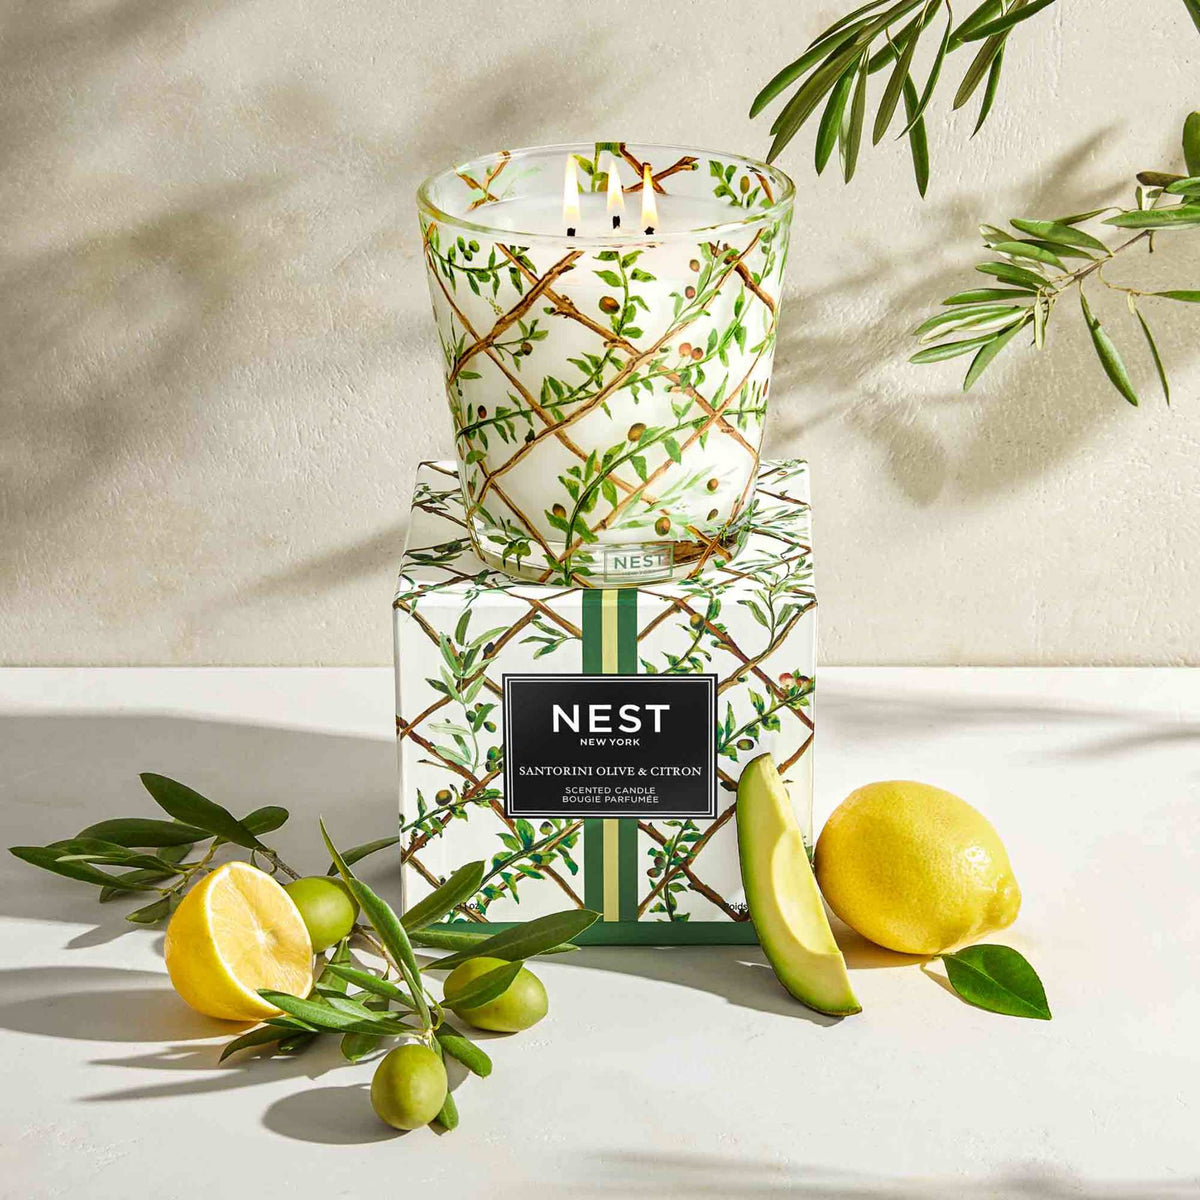 Nest Santorini Olive & Citron Specialty 3 Wick Candle .